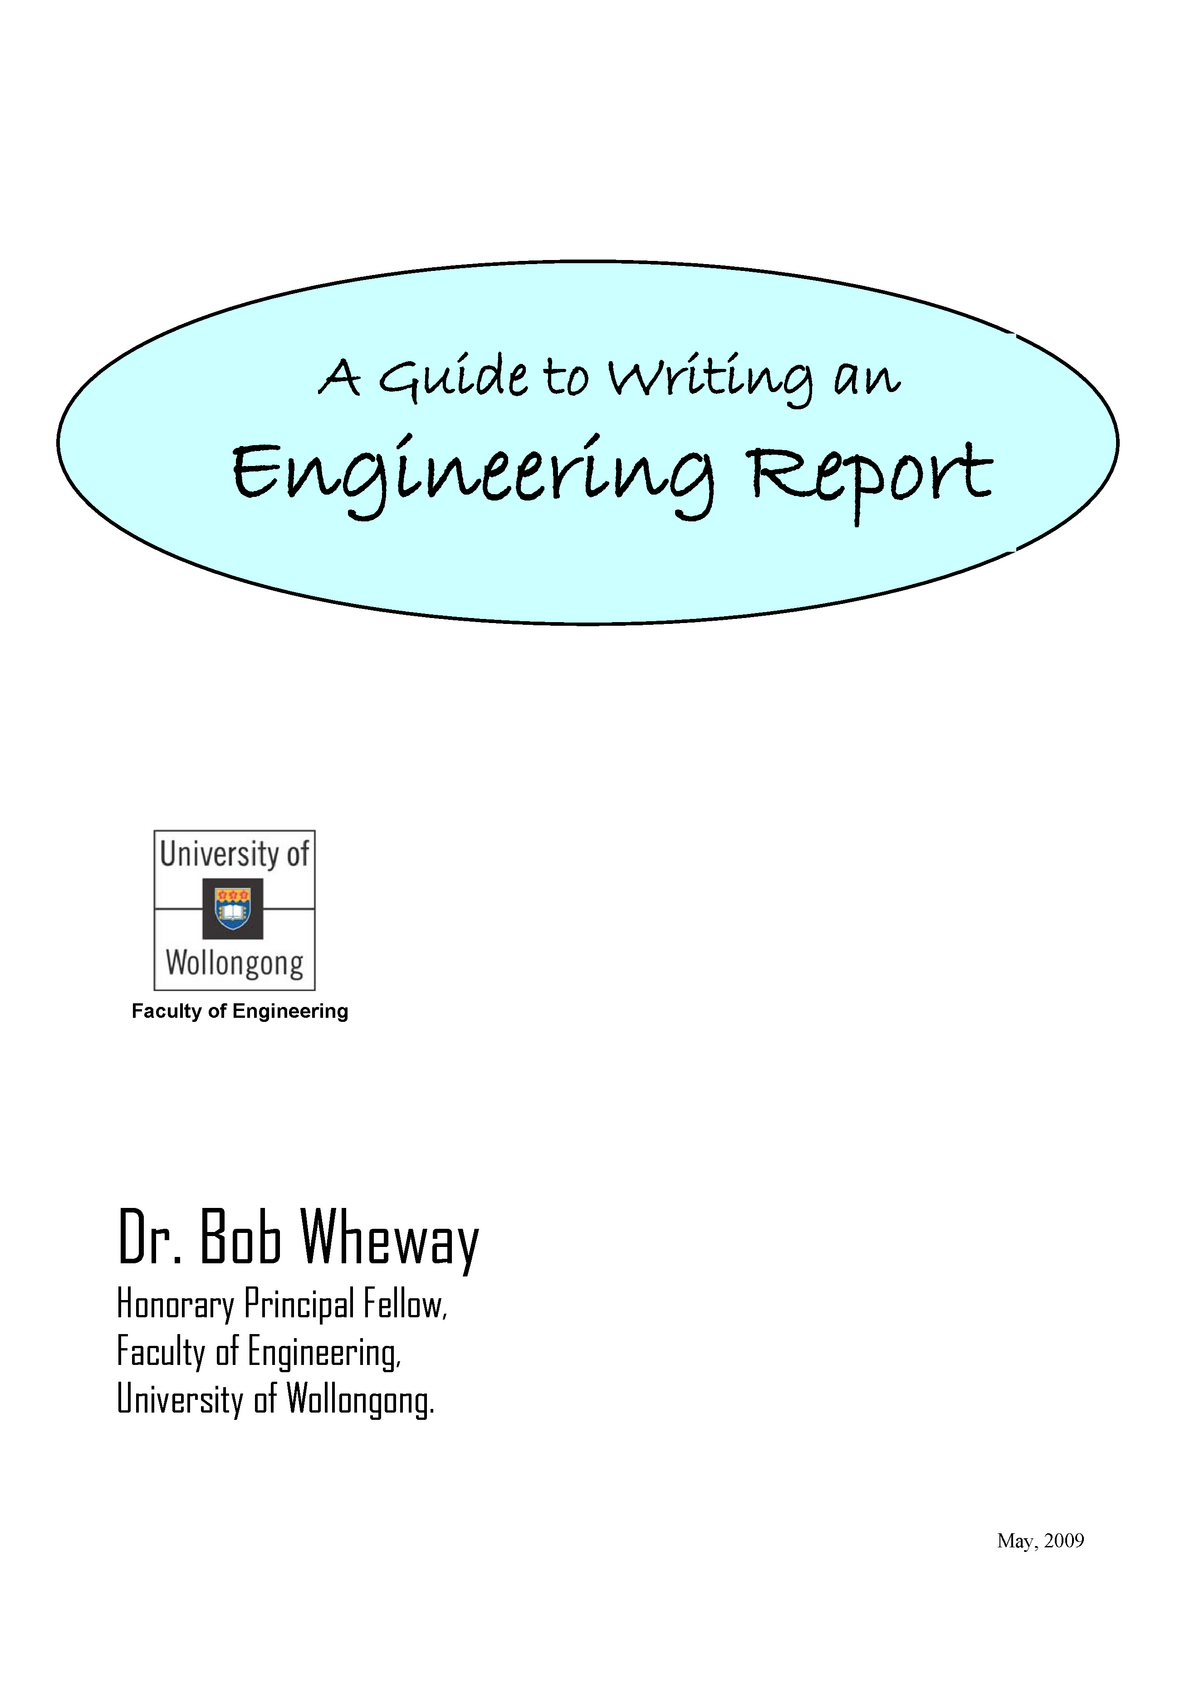 Engineering Report Template A Guide to Writing an Engineering Report